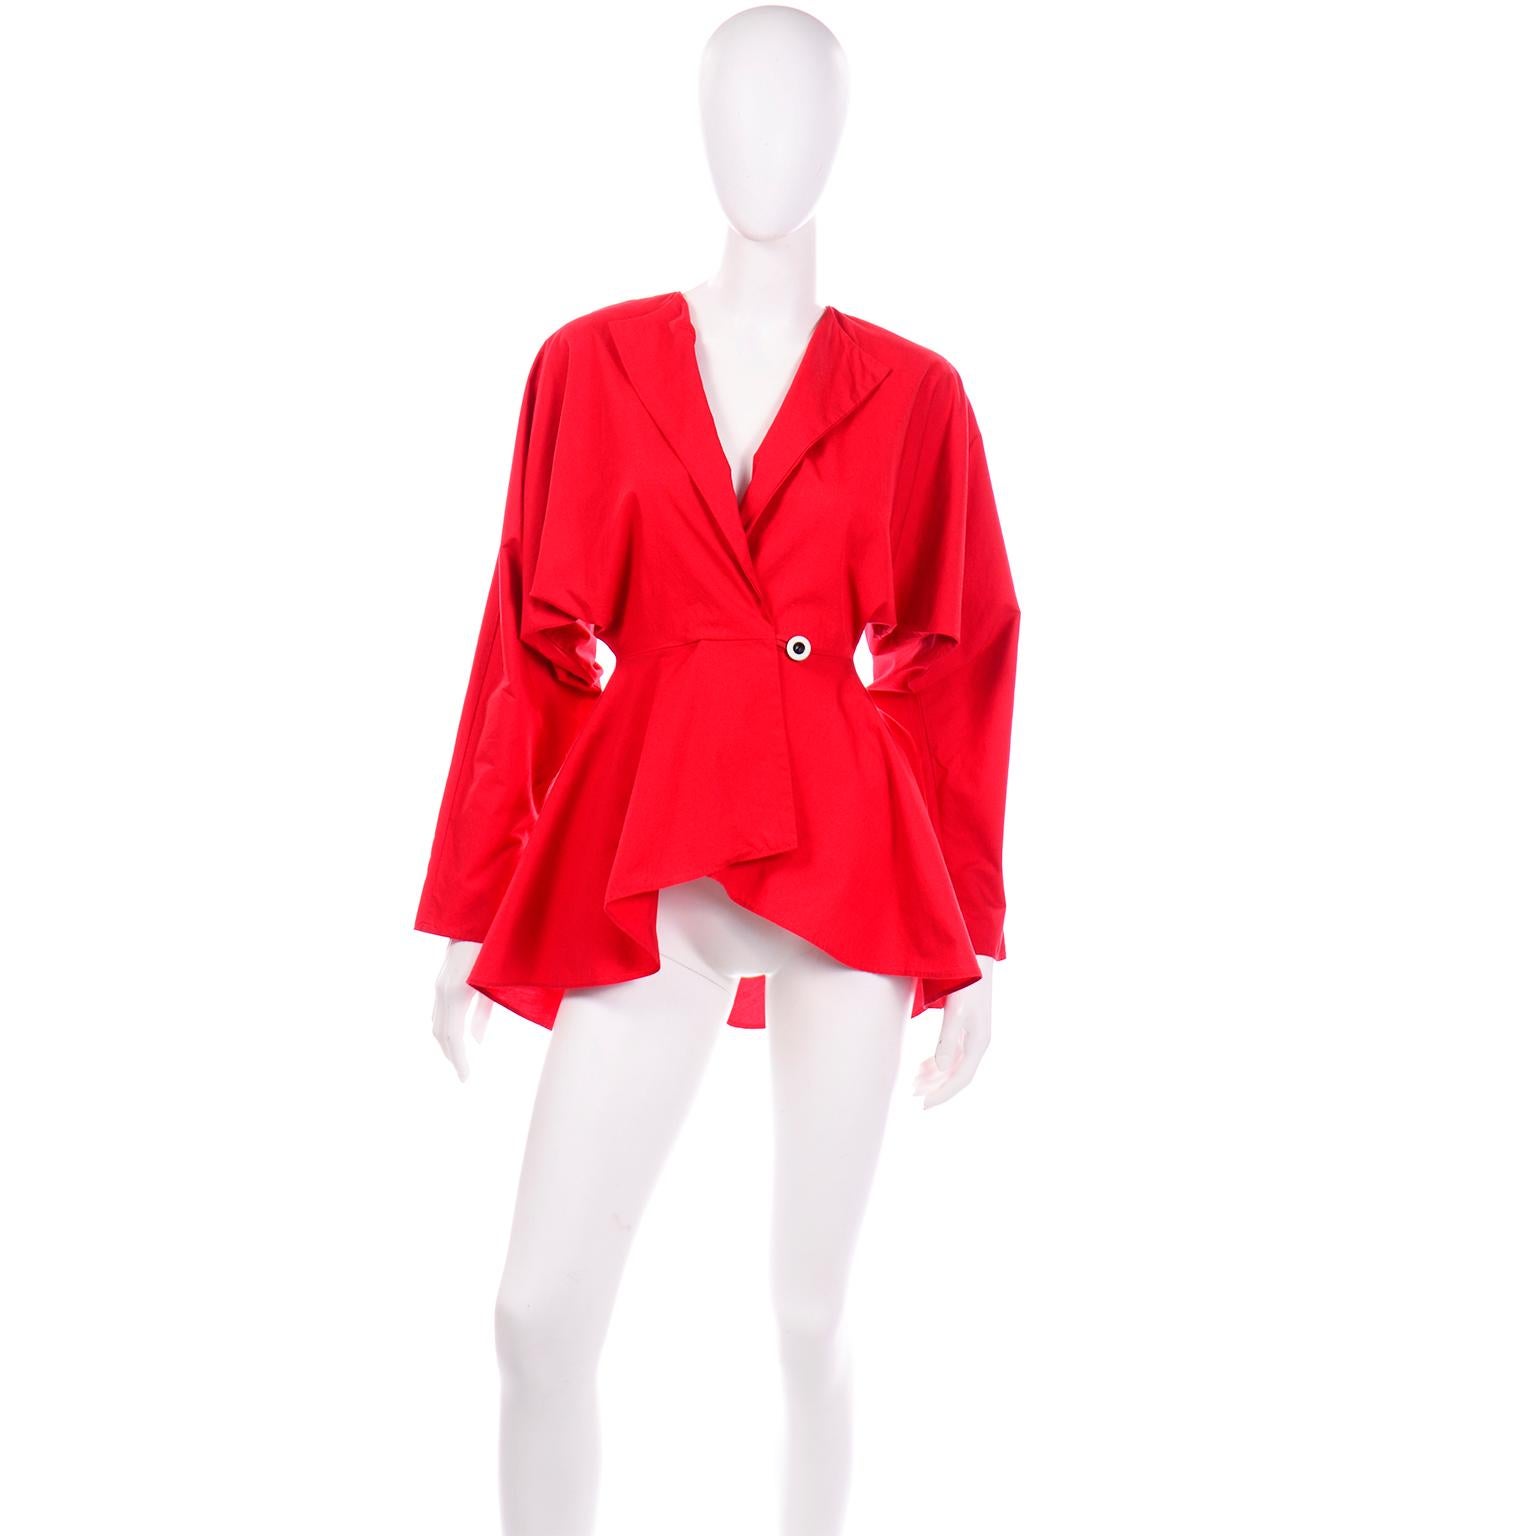 We adore vintage Norma Kamali and they are a true testament to the fact that she is one of the most innovative American designers! We add her pieces to our collection whenever we find them and we couldn't resist this 1980's red cotton peplum jacket!